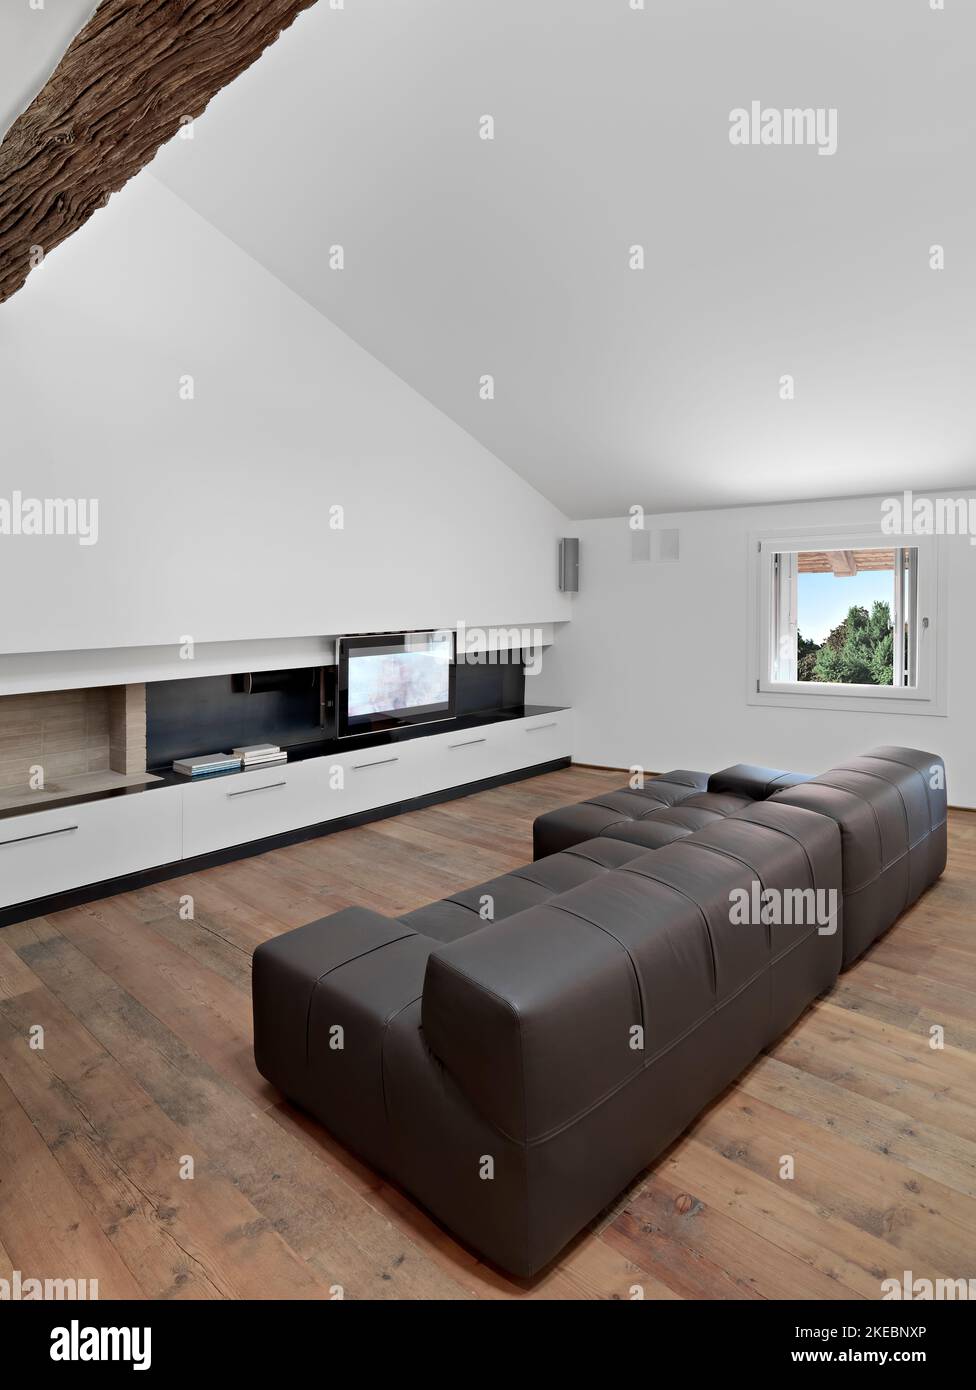 modern living room interior in the foreground the brown leather sofa the flooring is in wood Stock Photo